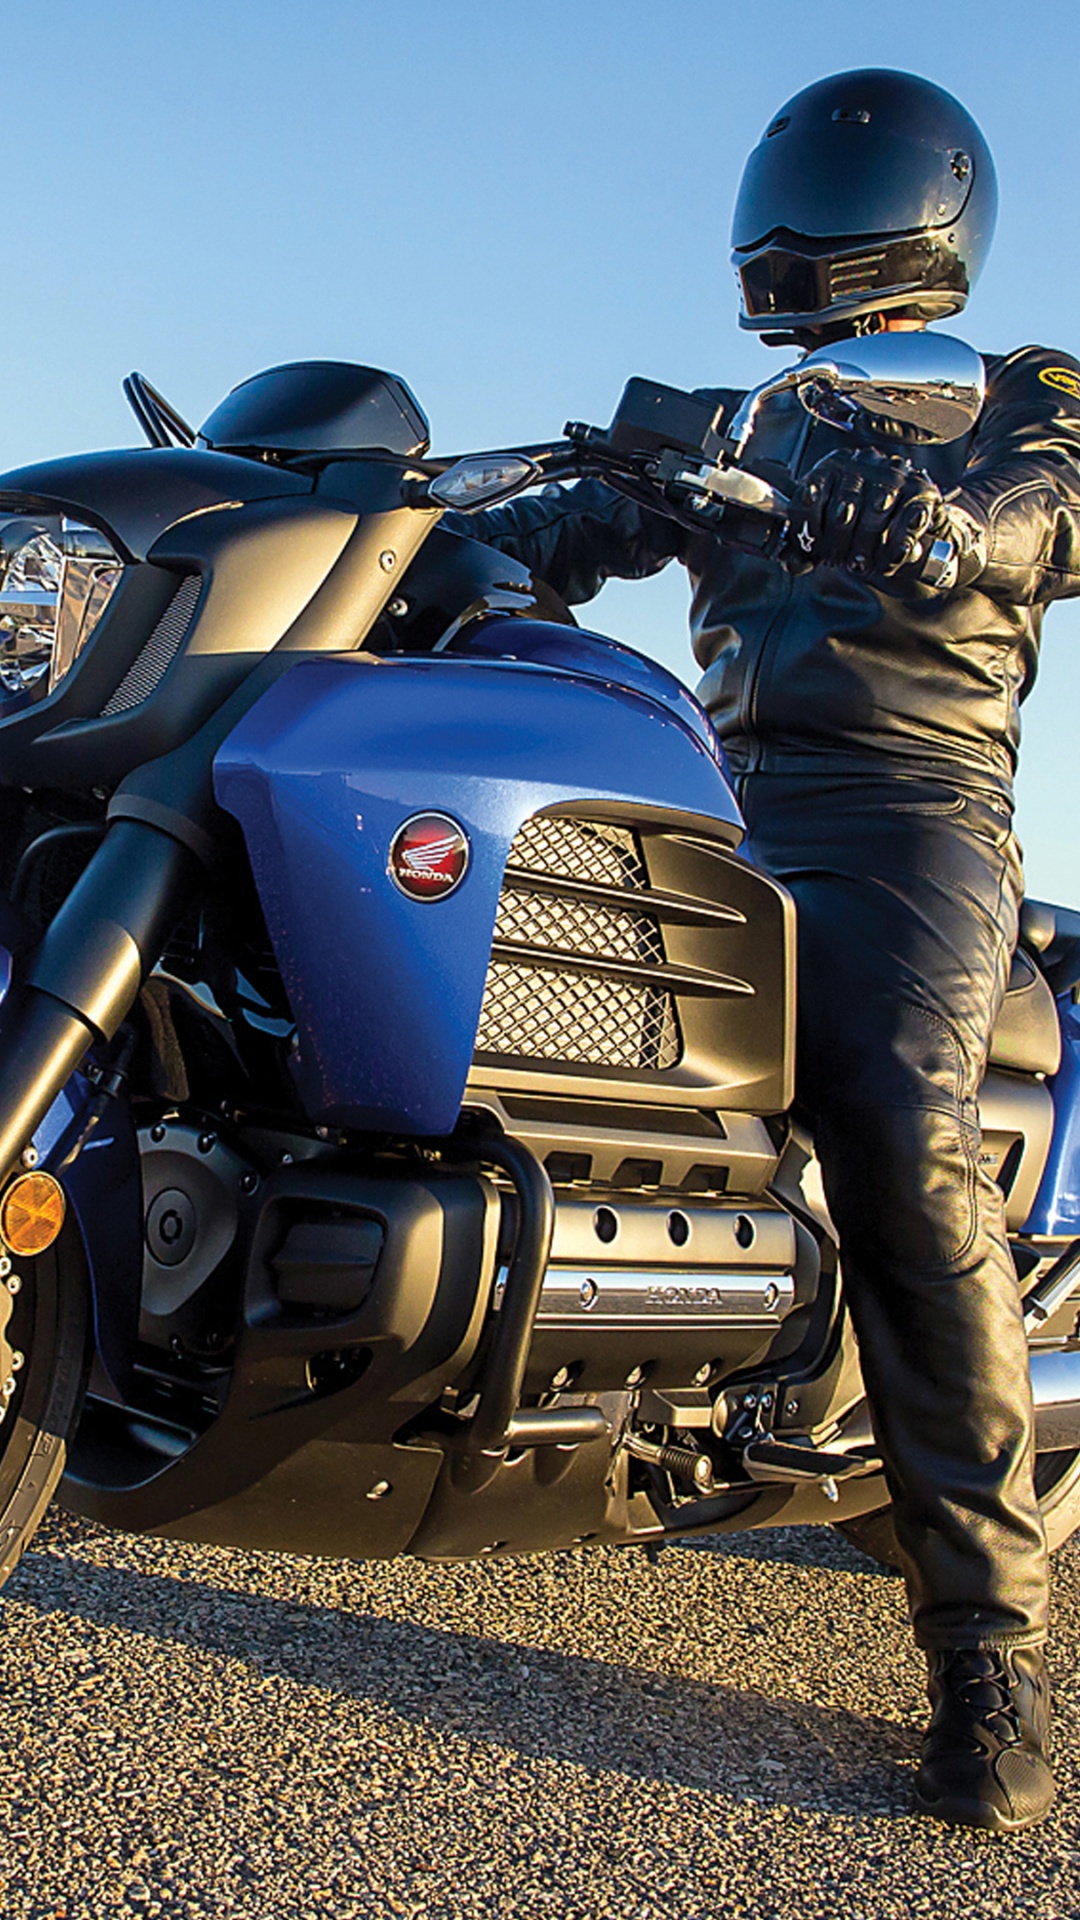 Man in Black Leather Jacket and Black Pants Riding Blue and Black Motorcycle. Wallpaper in 1080x1920 Resolution